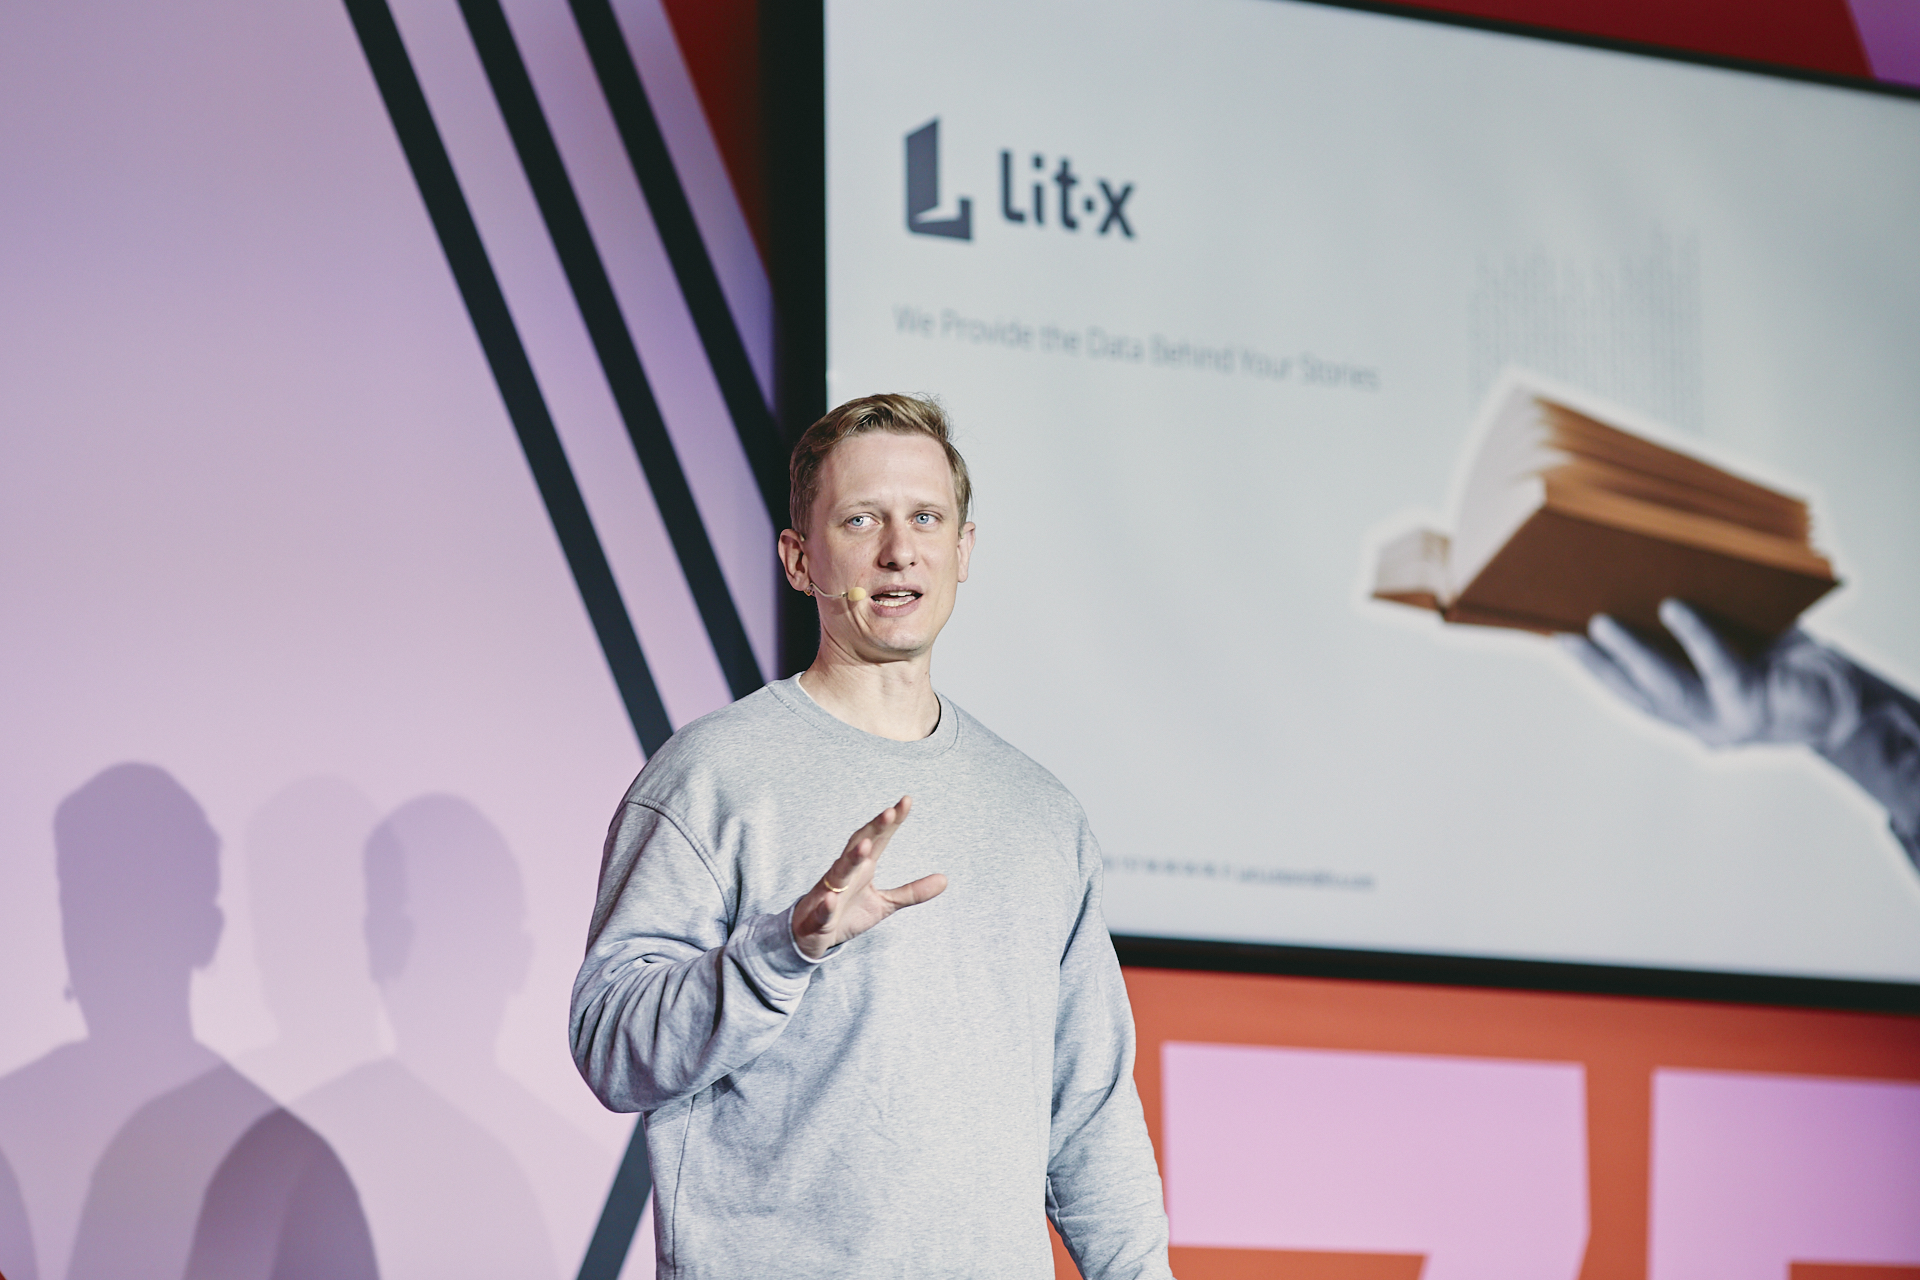 Lars Leipson at the pitch (Lit-X)